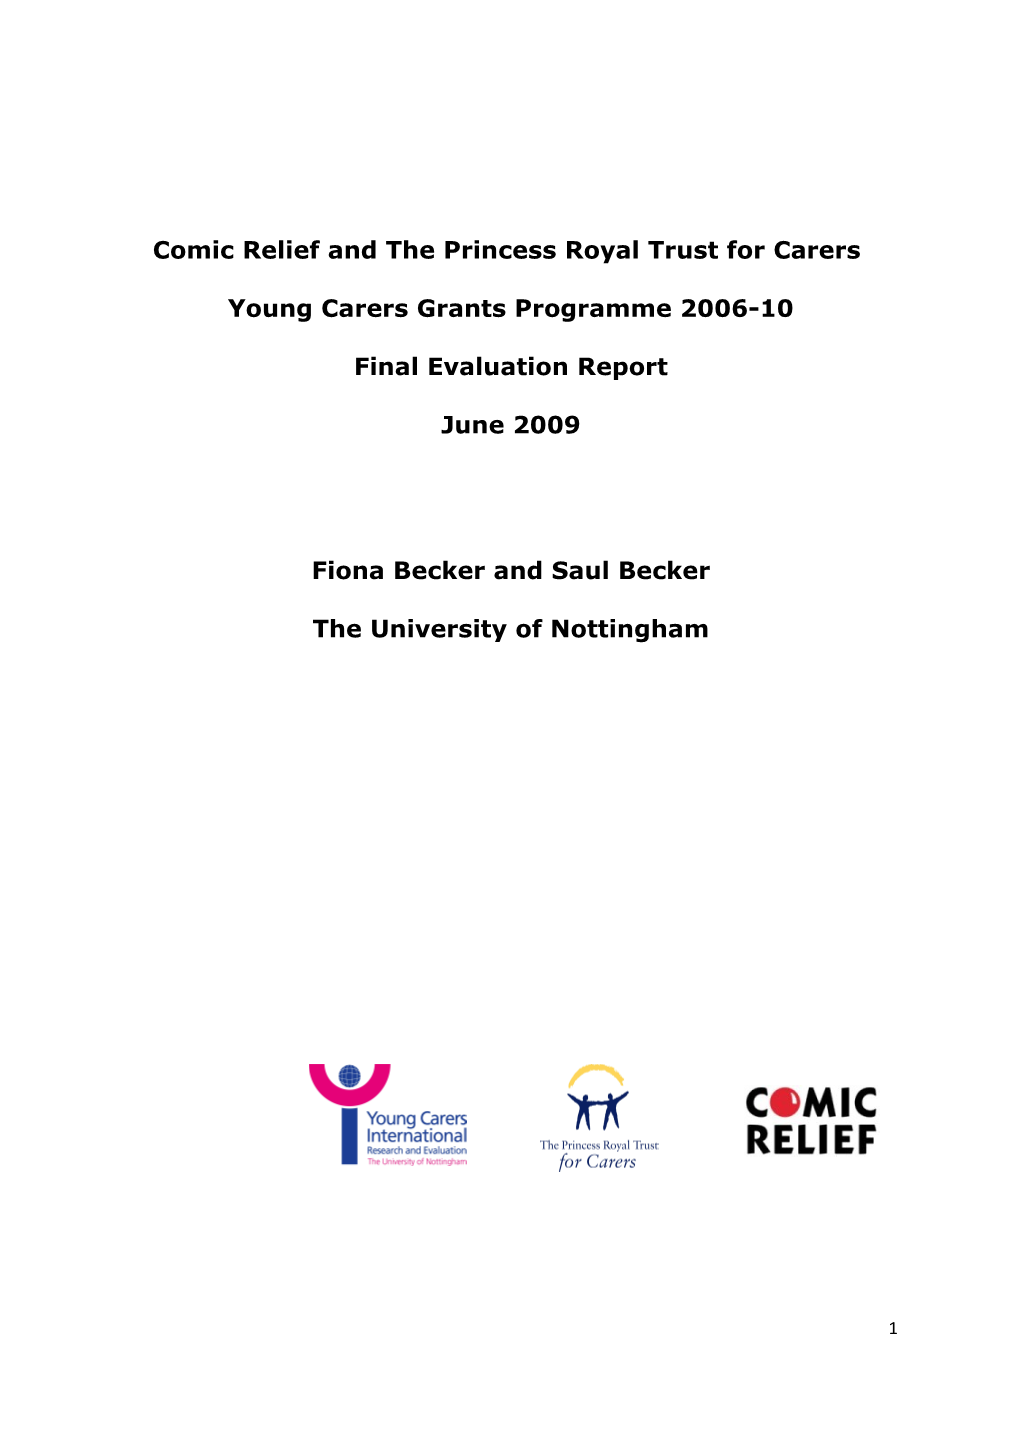 Comic Relief and the Princess Royal Trust for Carers